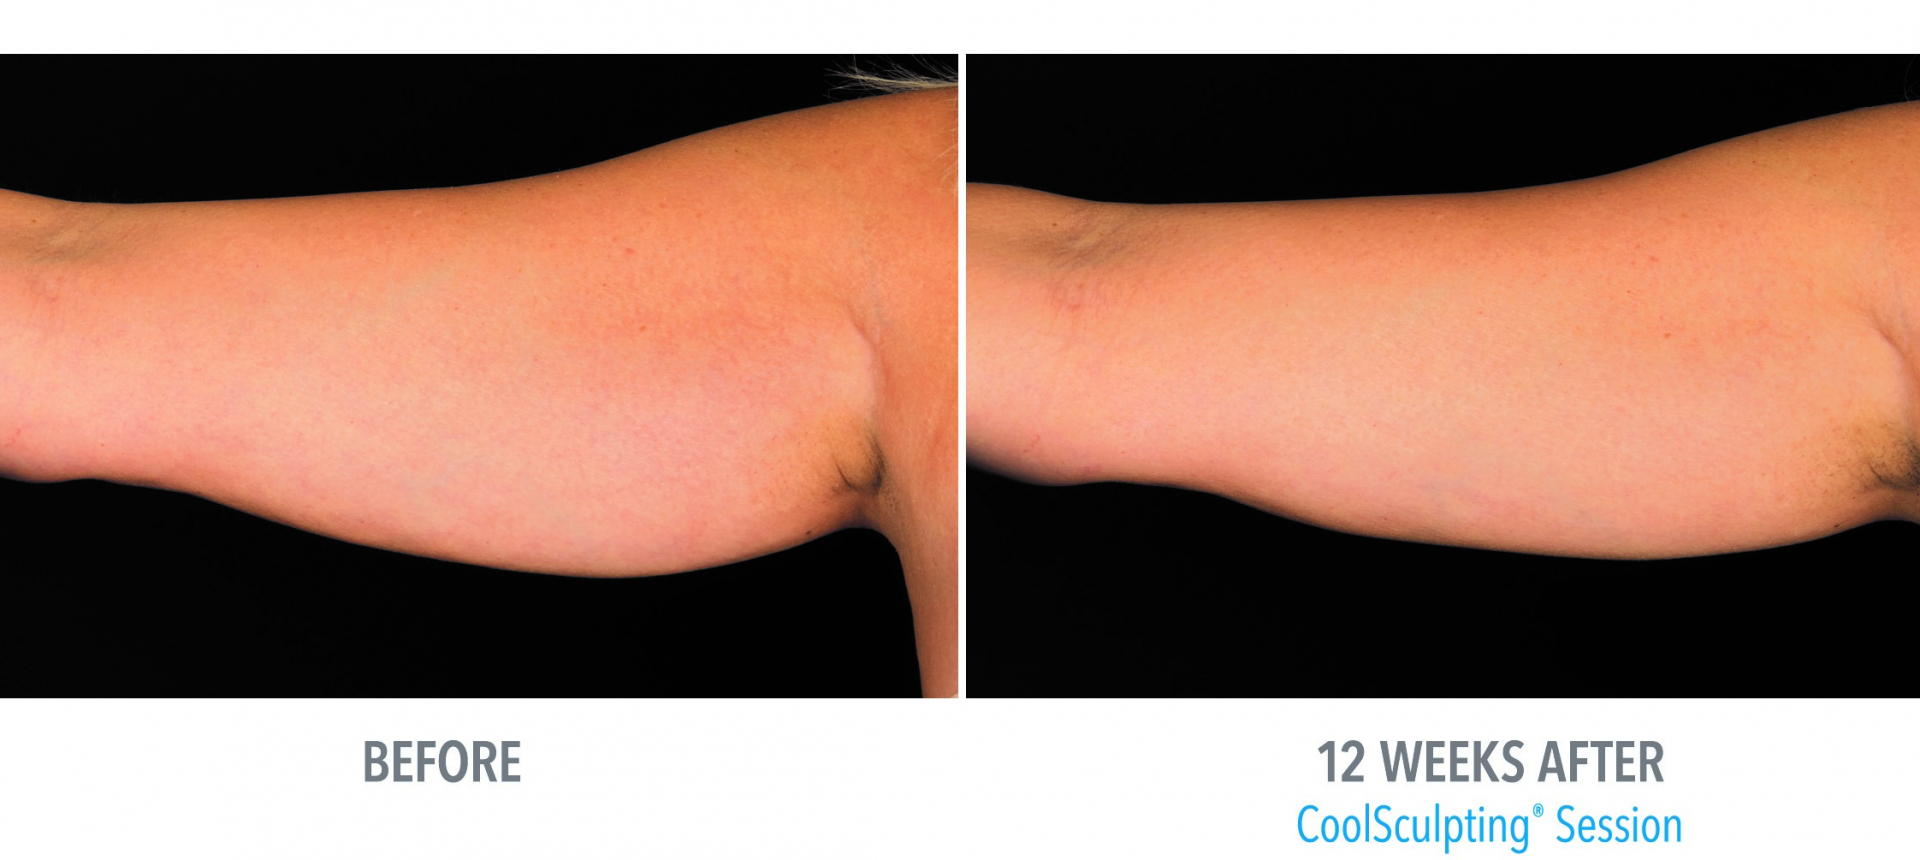 An Alternate to Liposuction - CoolSculpting!